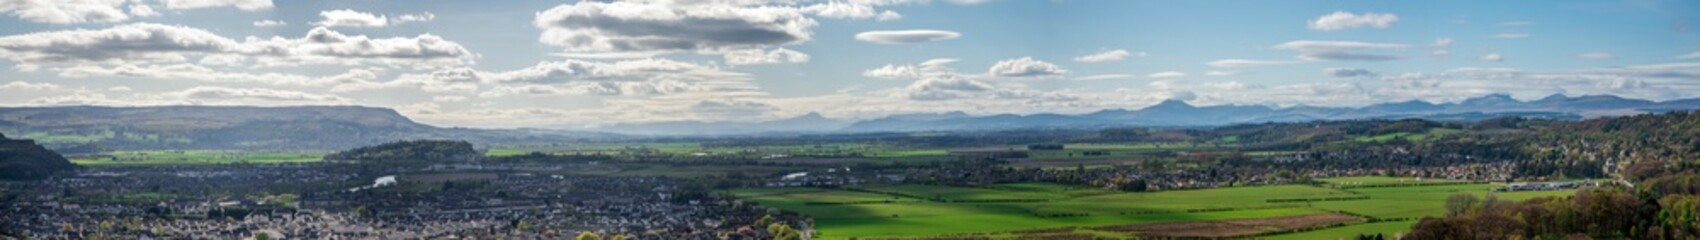 Panoramic view of Stirling City, Menteith hills and river Forth from the Wallace Monument